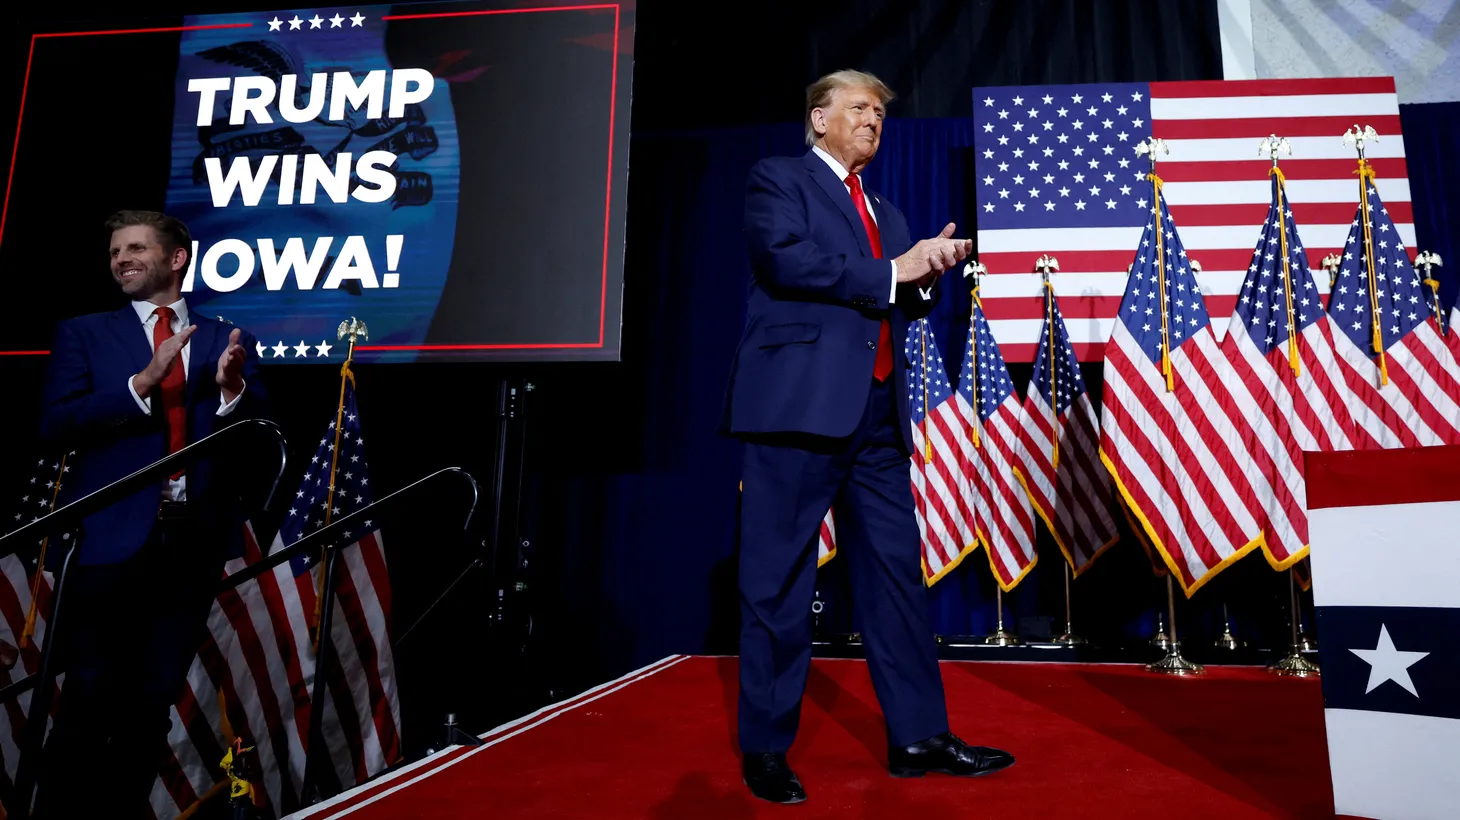 Republican presidential candidate and former U.S. President Donald Trump takes the stage during his Iowa caucus watch party in Des Moines, Iowa, January 15, 2024.